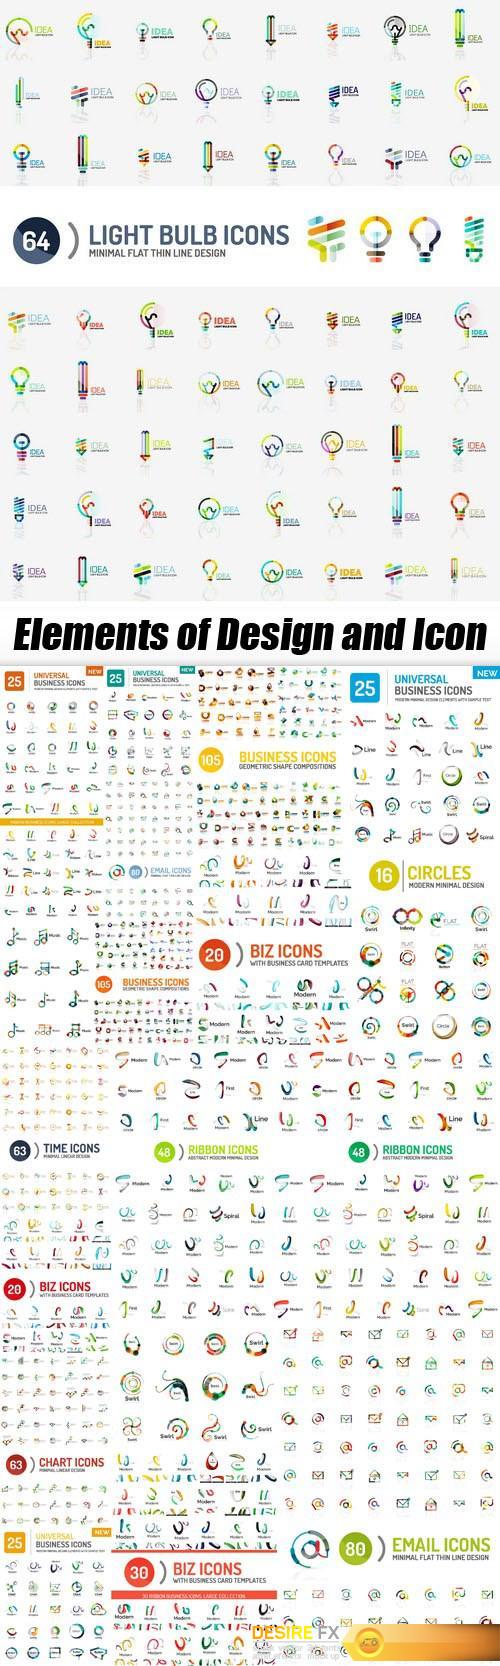 Elements of Design and Icon